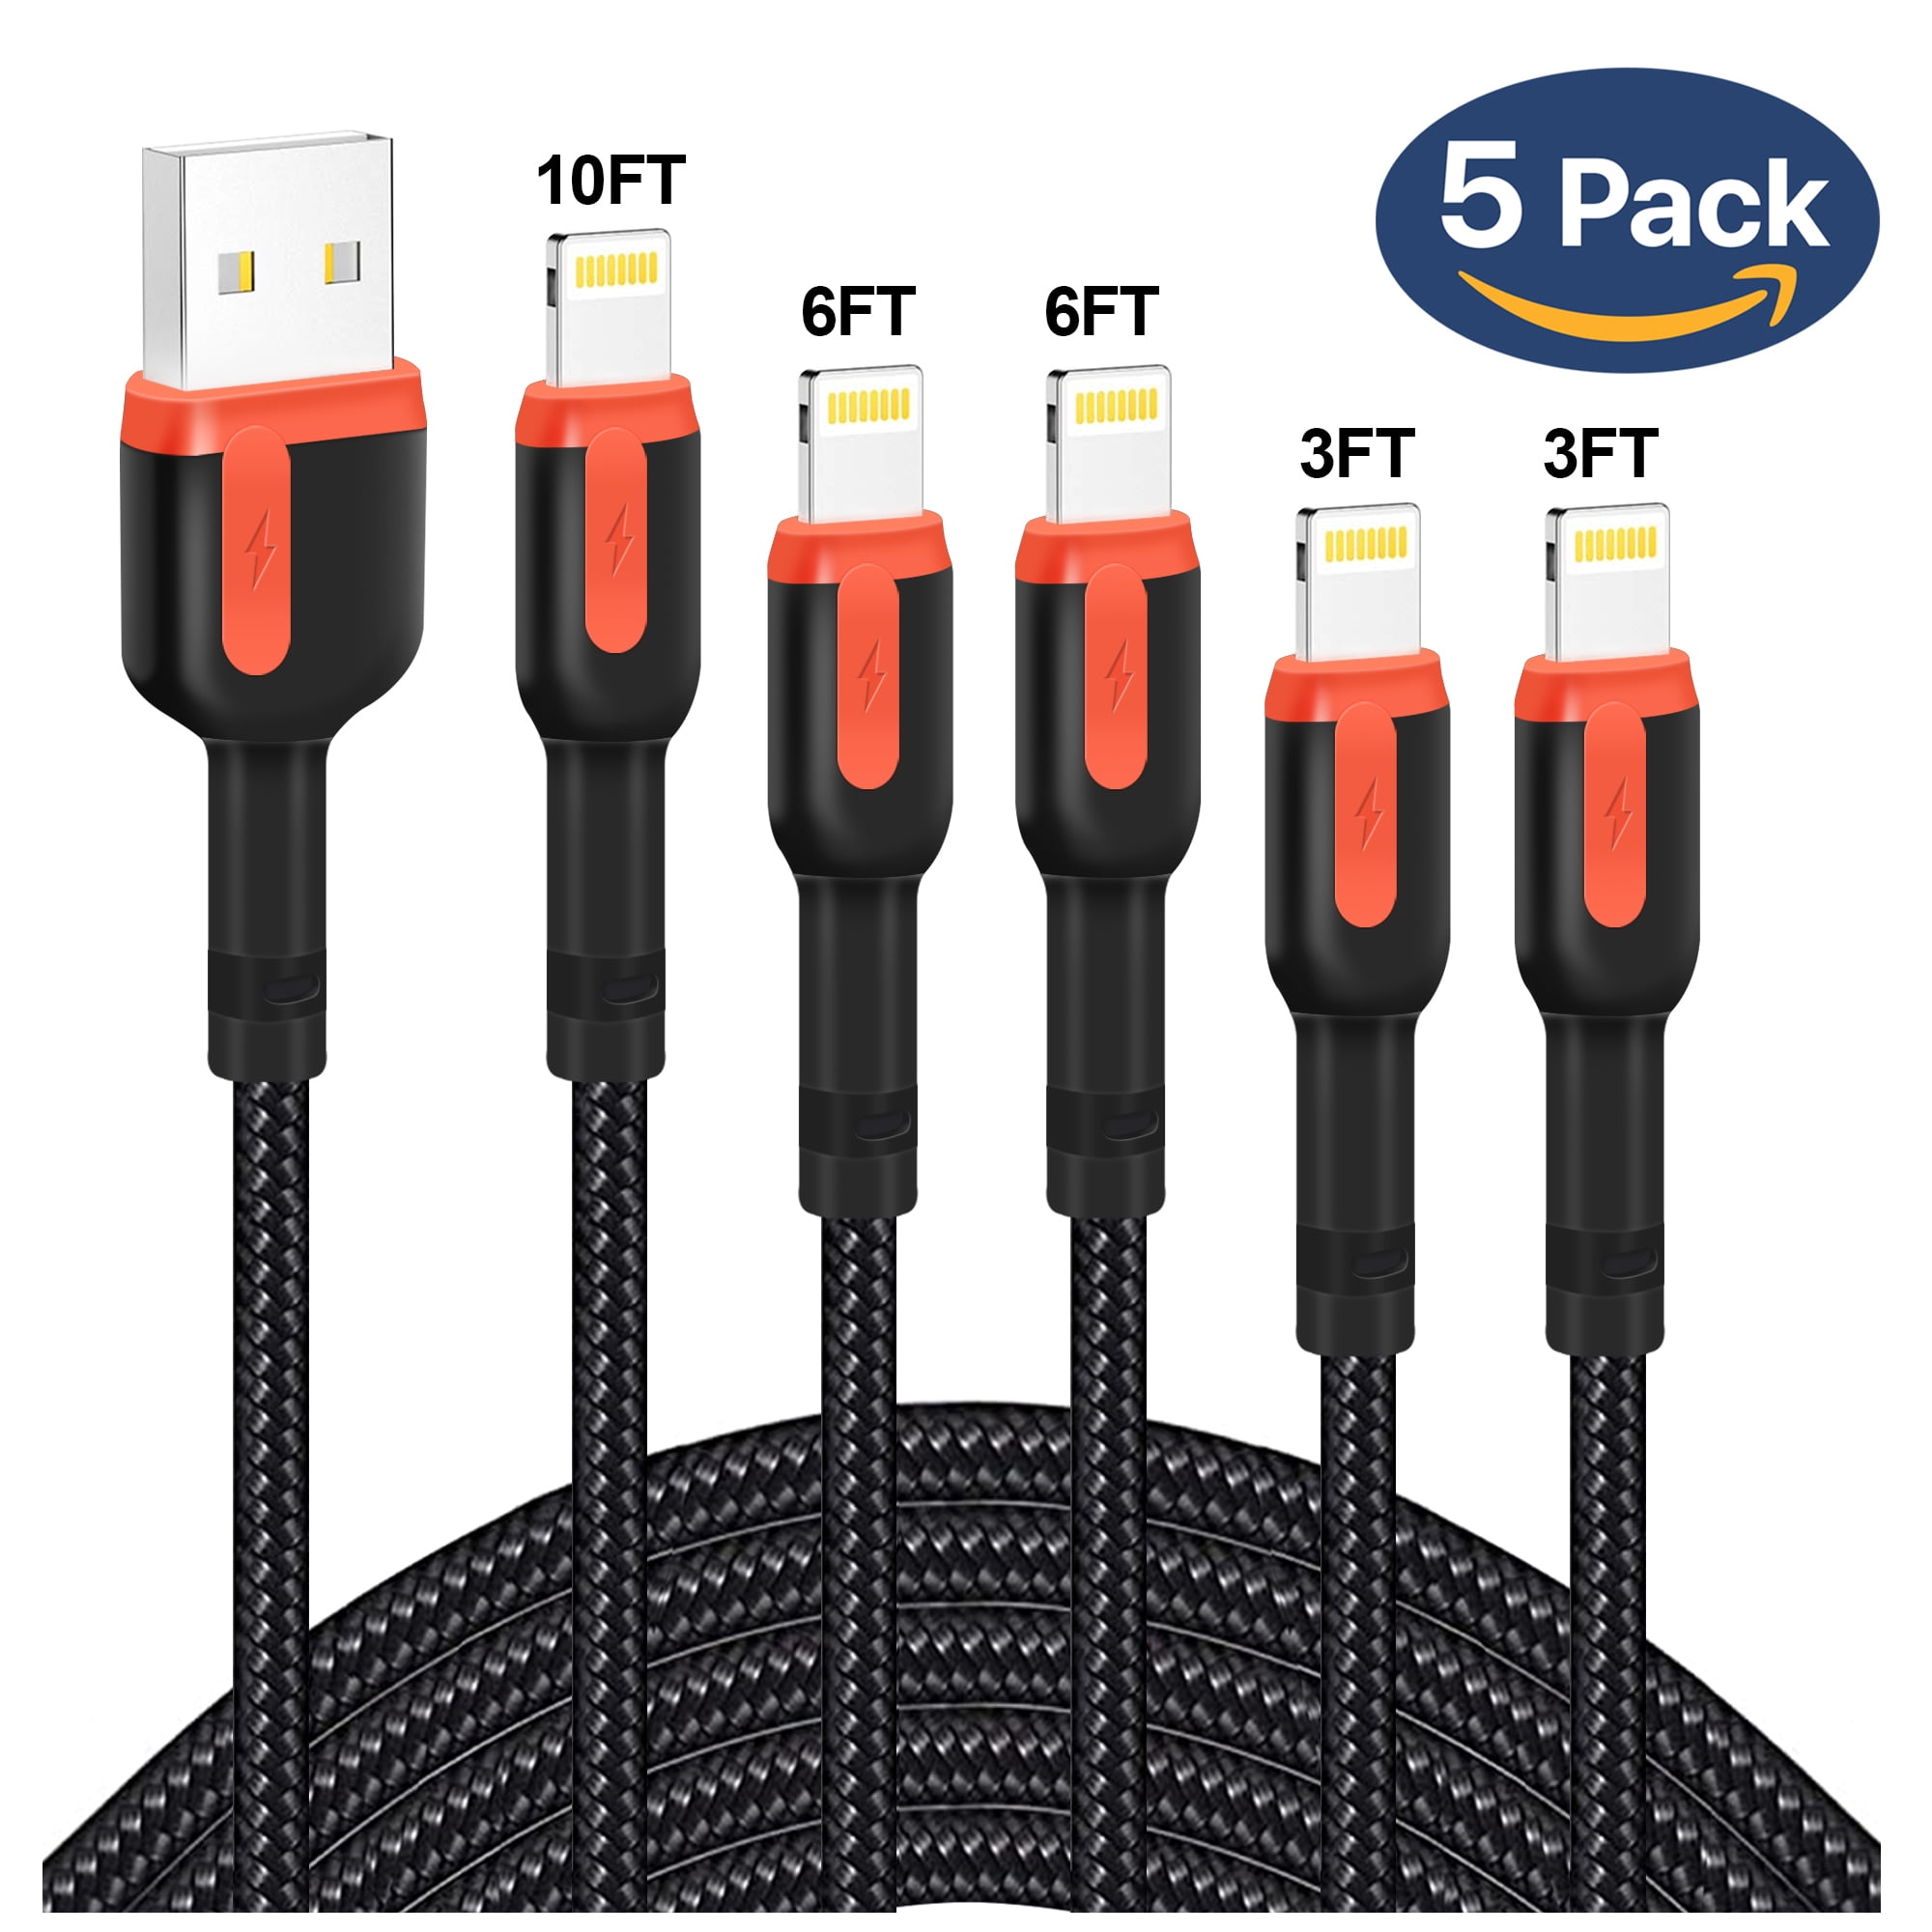 VIPFAN IPHONE CHARGER LIGHTNING CABLE 3 PACK BLACK BRAND NEW 